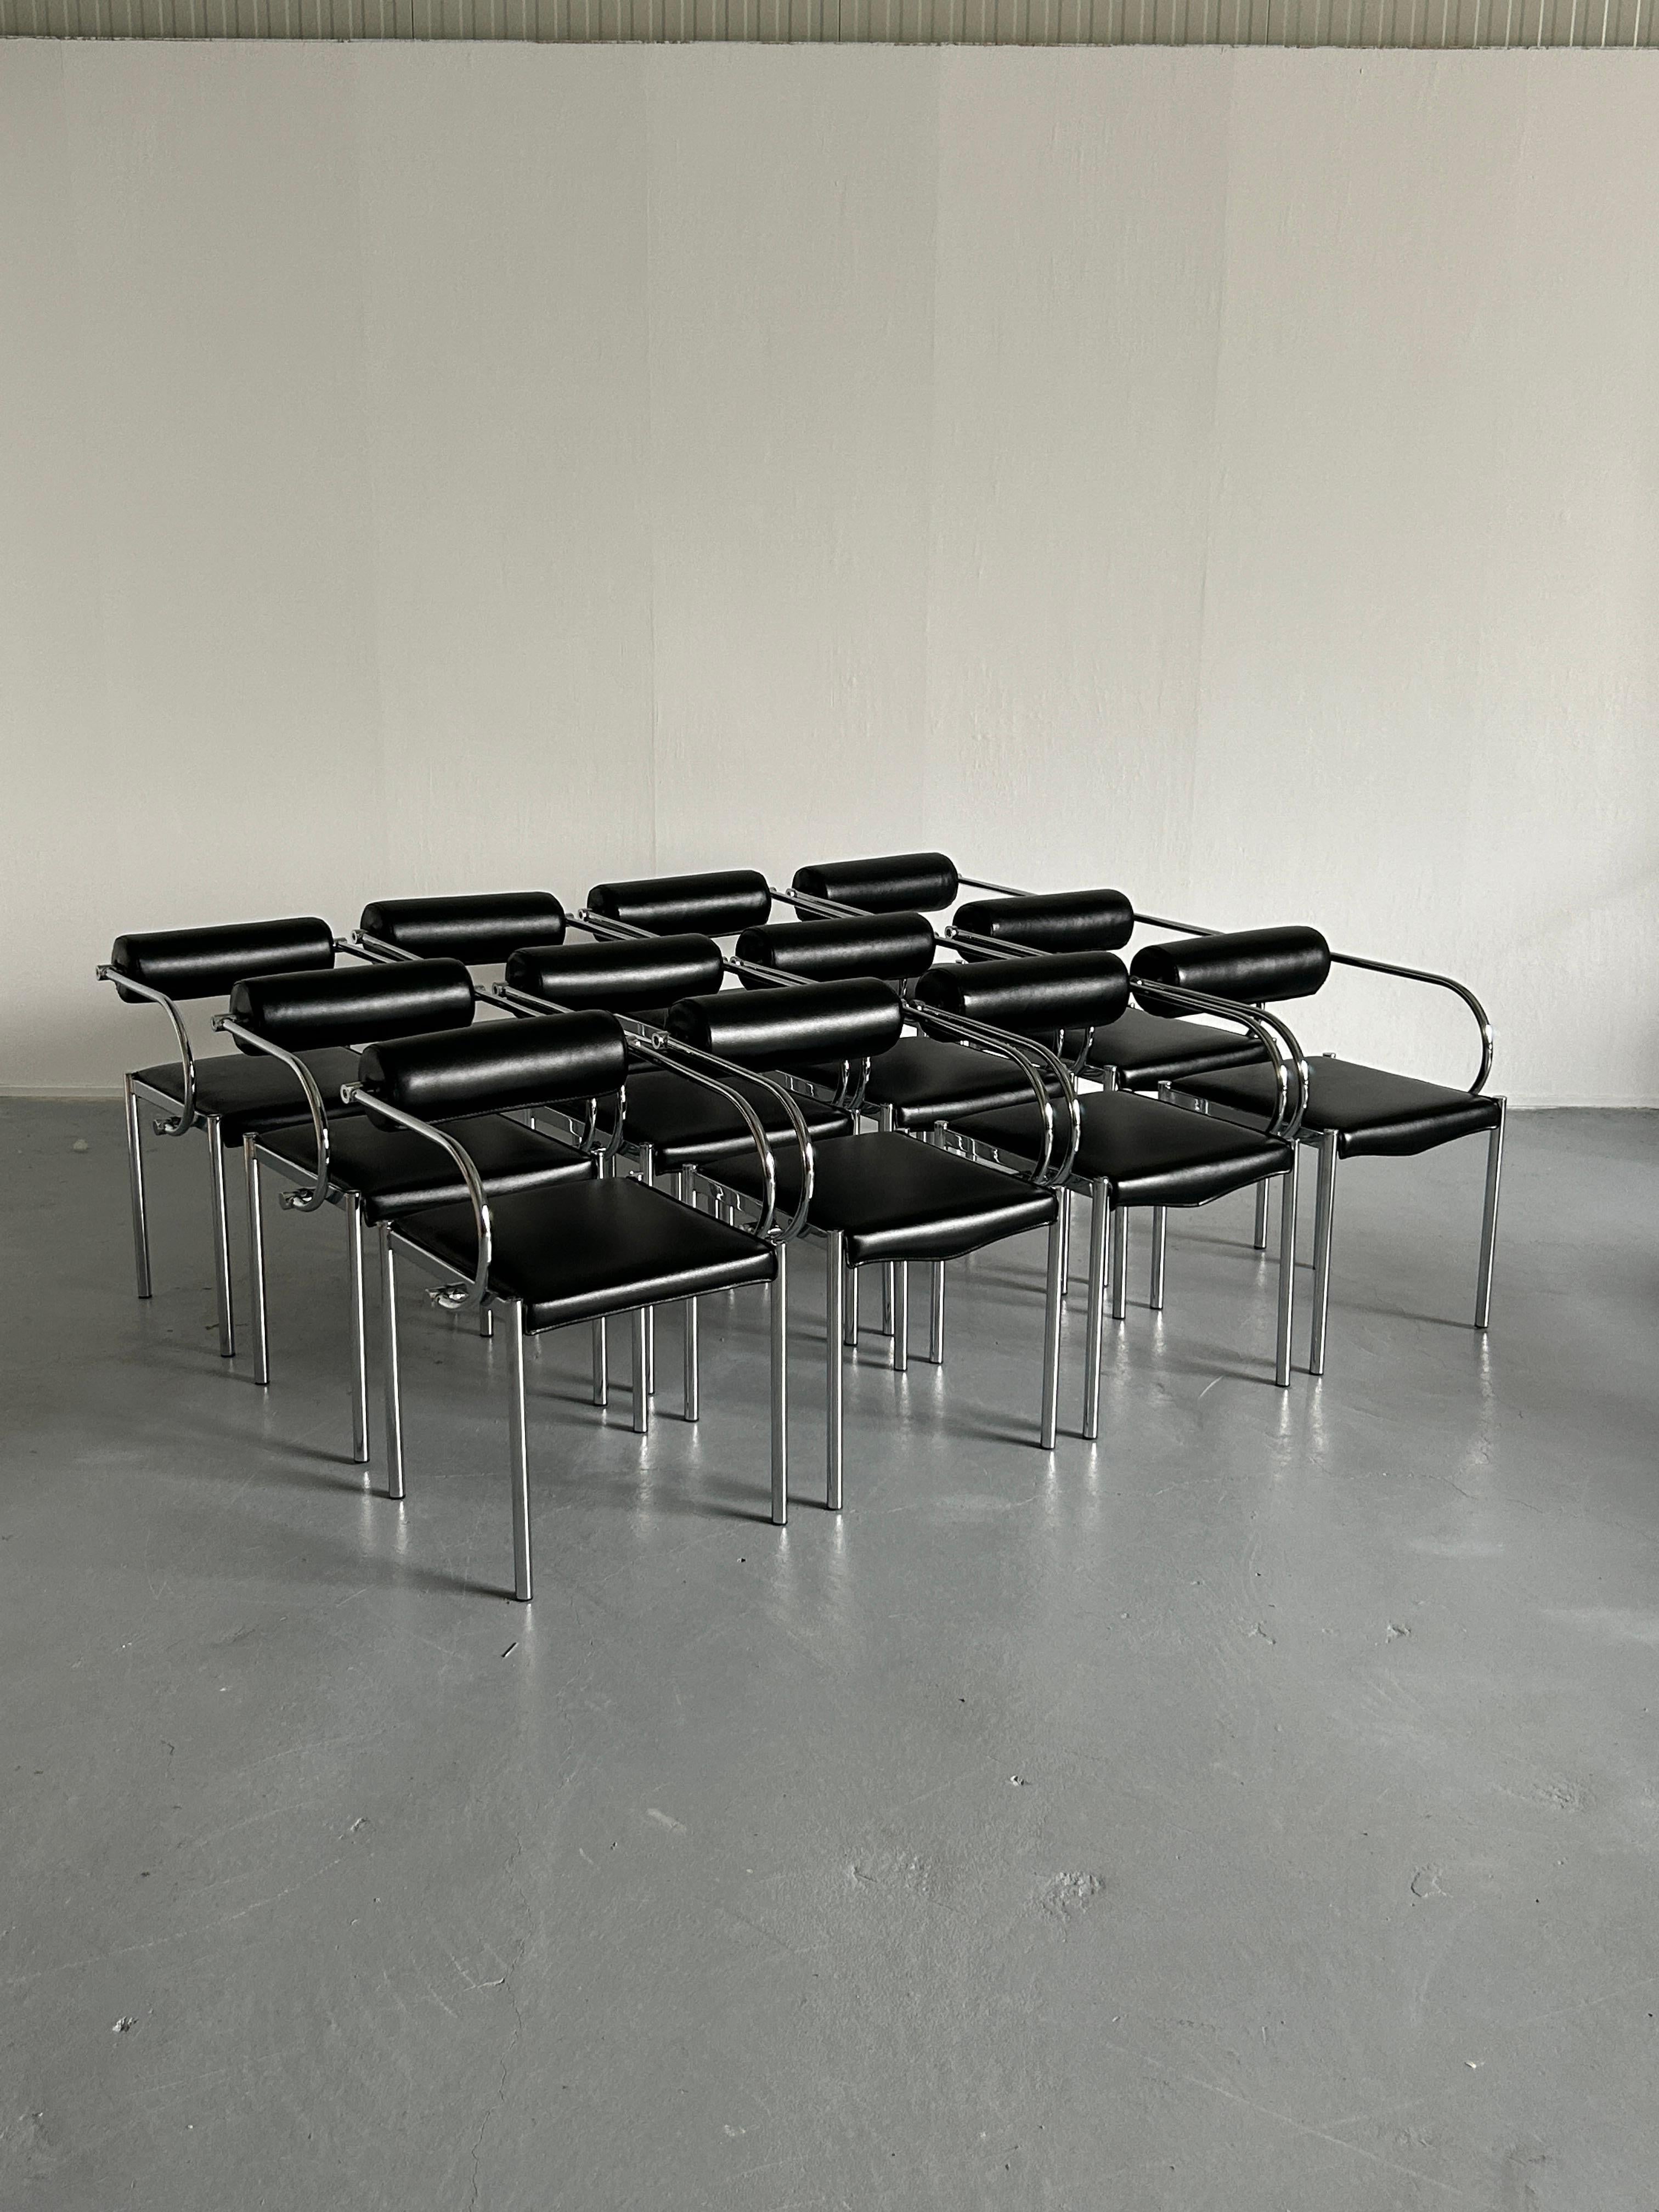 Set of twelve postmodern tubular steel and black faux leather dining chairs, in the style of Arcadia by Paolo Piva for B&B Italia, 1980s
Very quality vintage Italian production from the late 1980s or early 1990s. 

In very good vintage condition